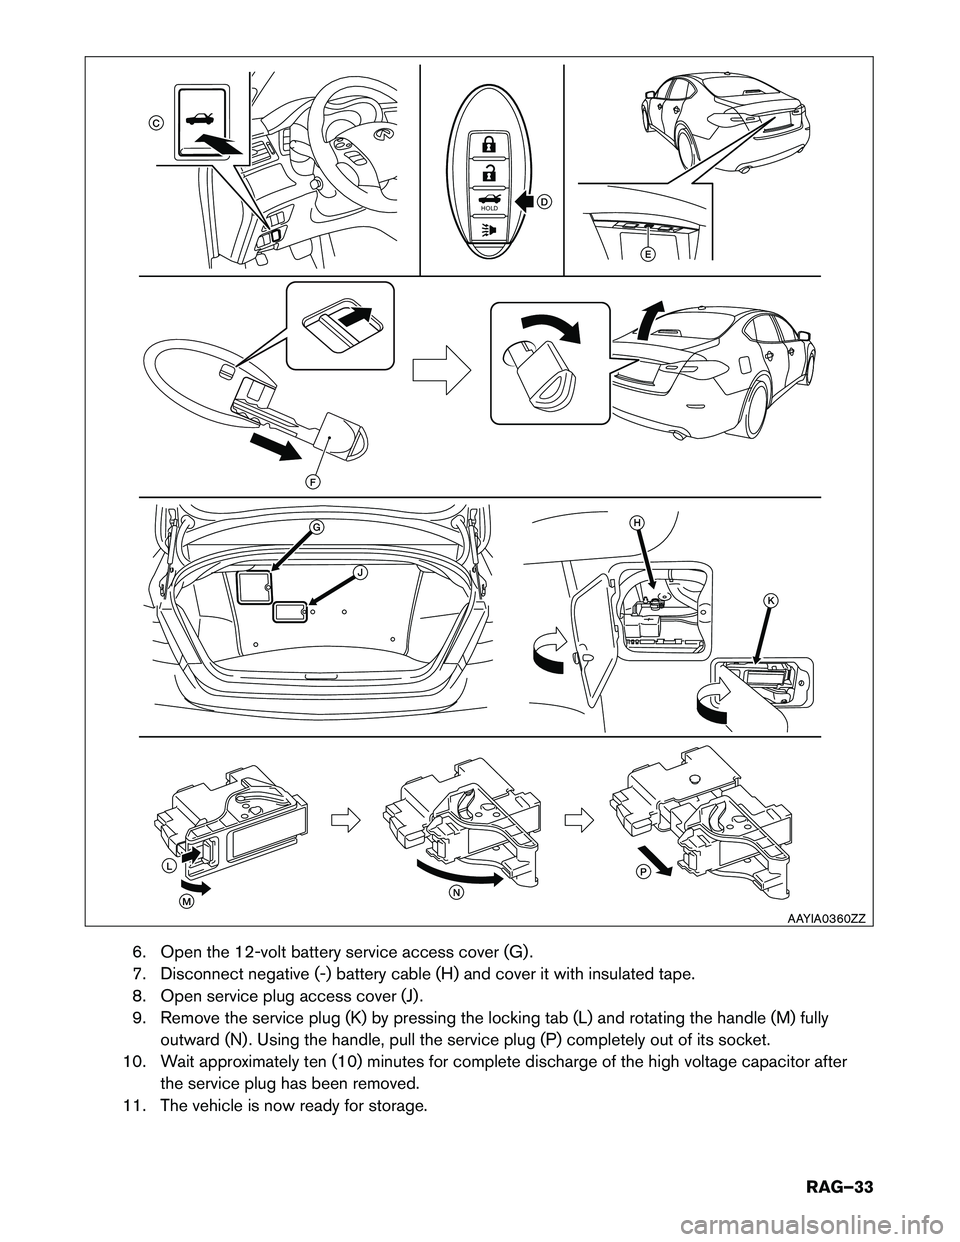 INFINITI Q70 HYBRID 2016  Roadside Assistance Guide 6. Open the 12-volt battery service access cover (G) . 
7. Disconnect negative (-) battery cable (H) and cover it with insulated tape.
8. Open service plug access cover (J) .
9. Remove the service plu